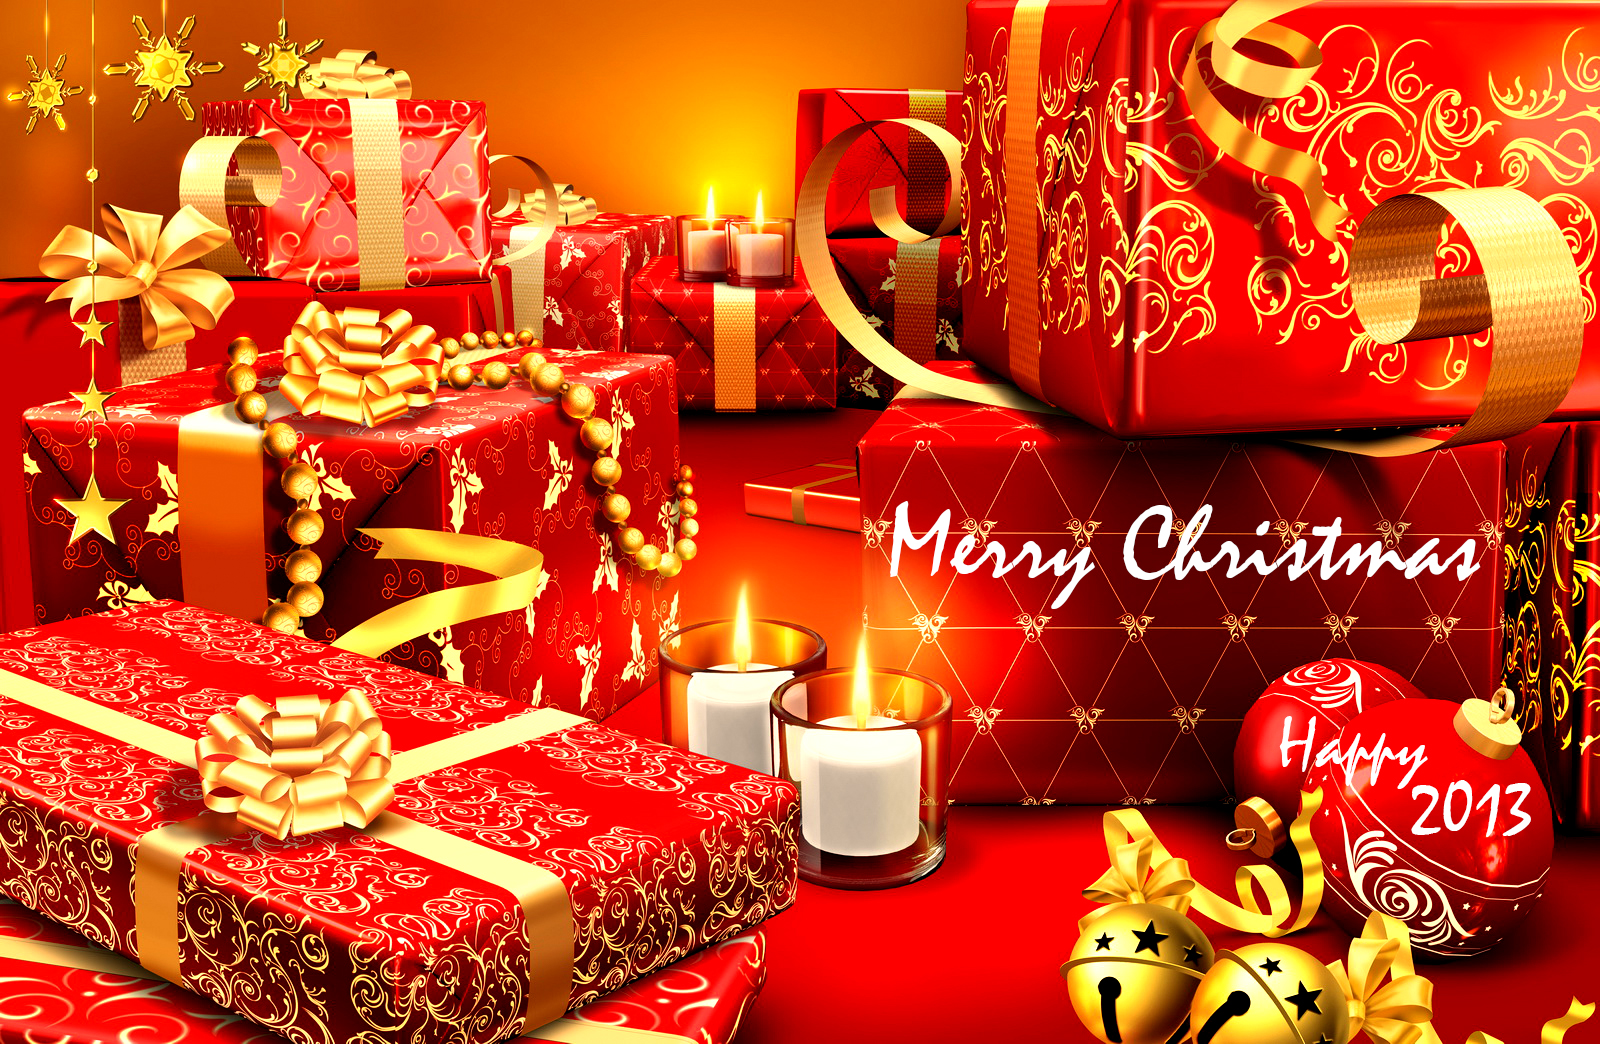 Merry Christmas And New Year Greetings Wishes